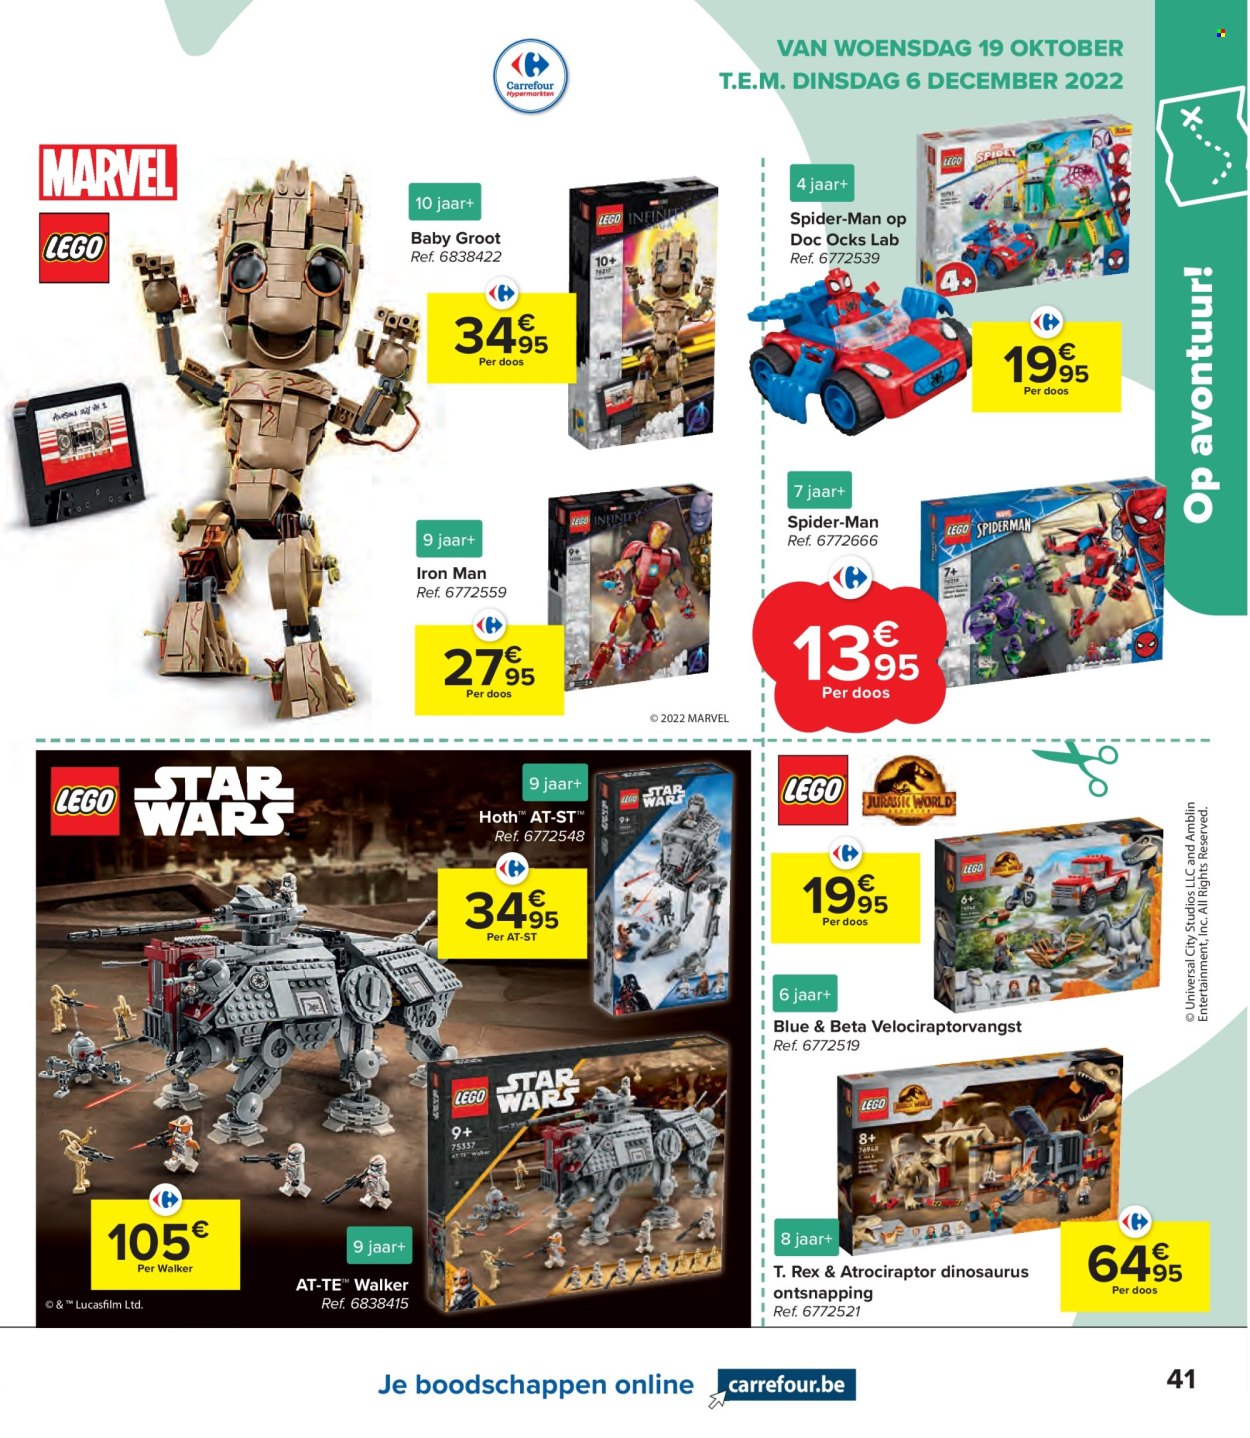 Catalogue Carrefour hypermarkt - 19.10.2022 - 6.12.2022. Page 41.